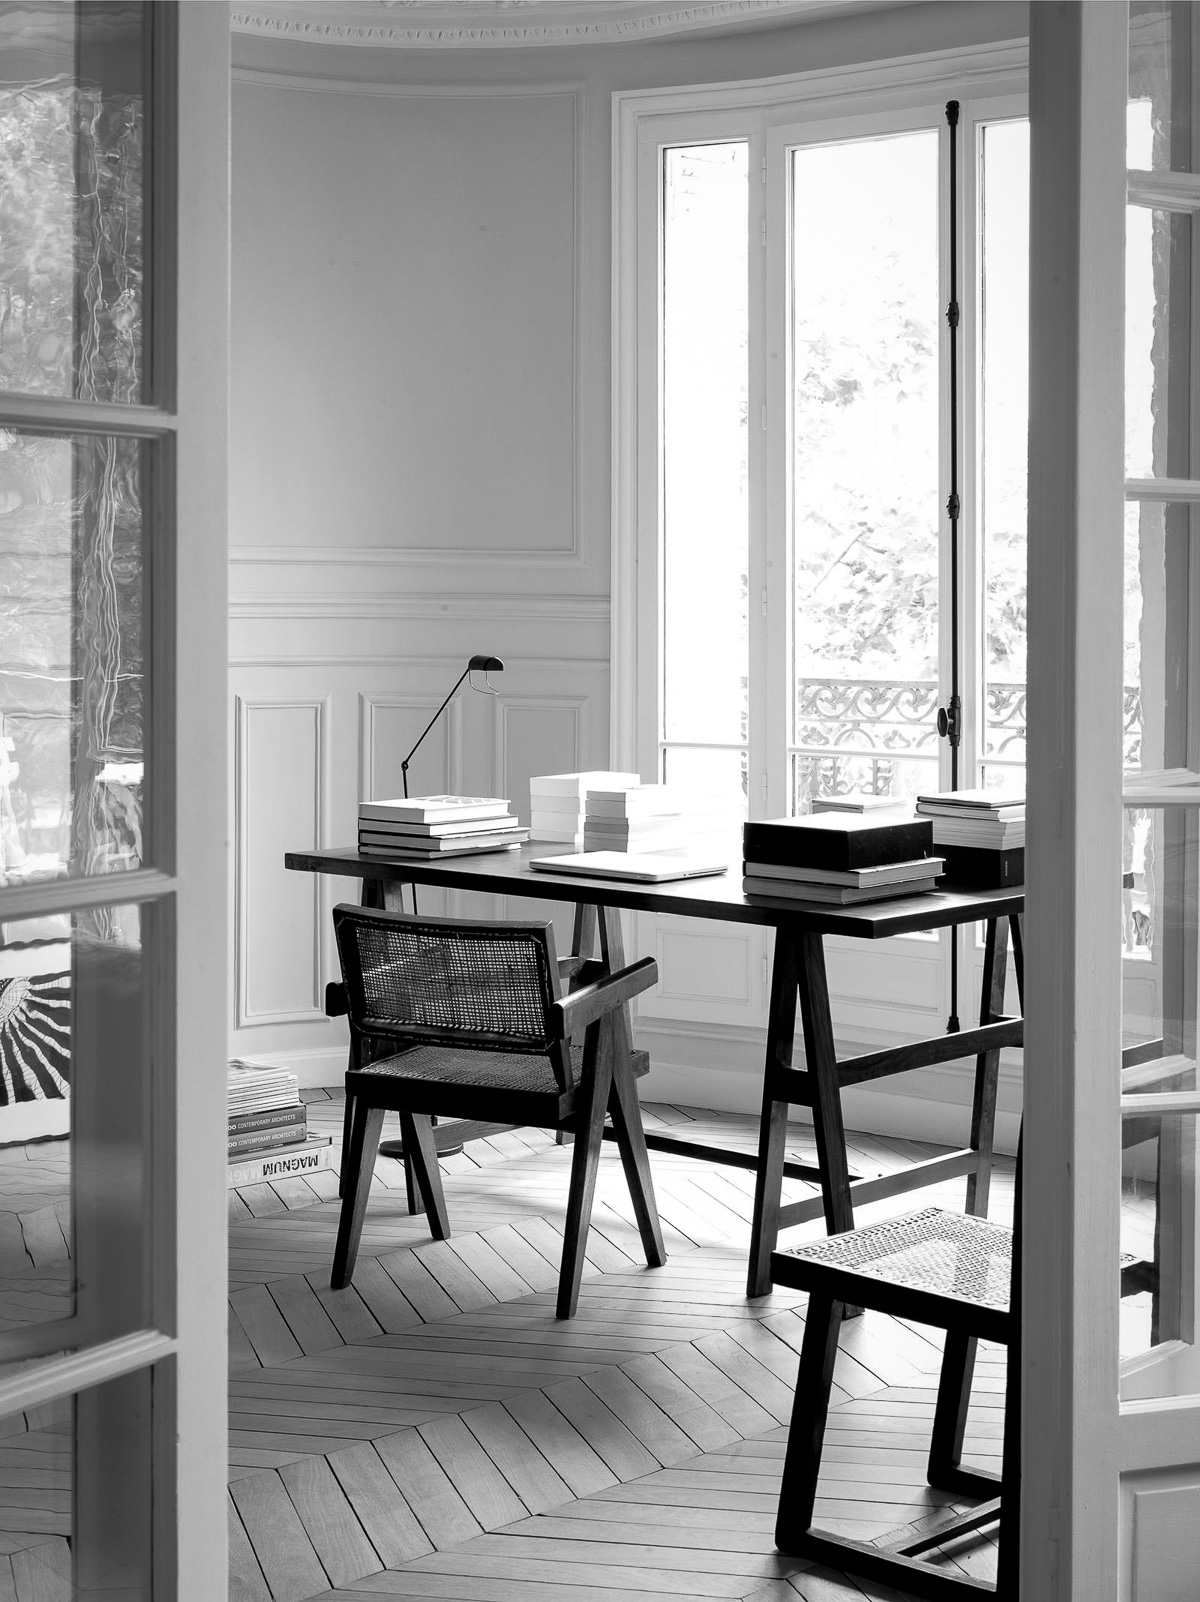 The workspace is done with trestle furniture, which is located next to the window to maximize the light while working